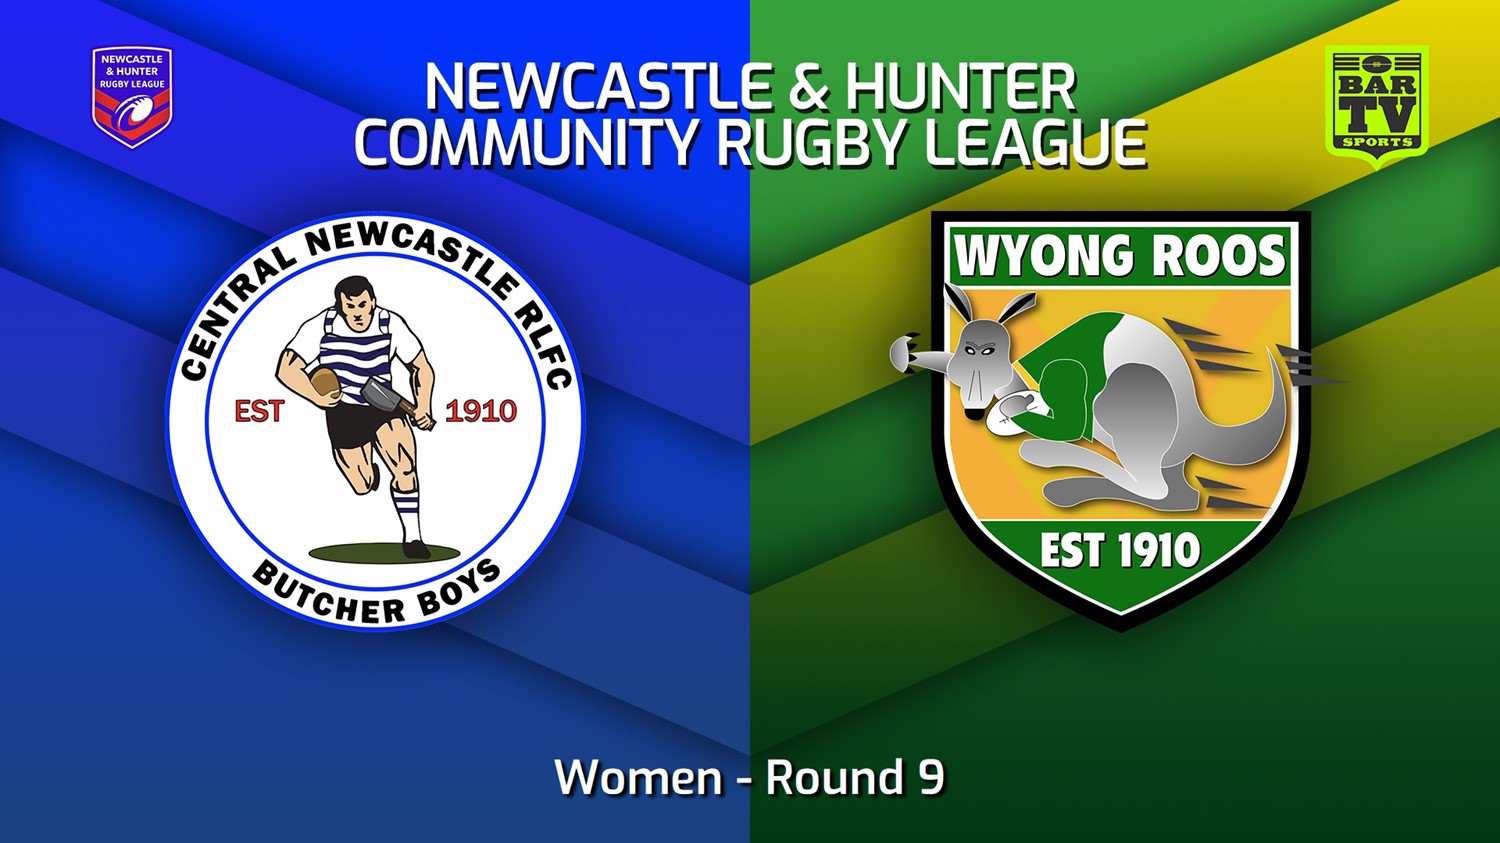 220812-NHRL Round 9 - Women - Central Newcastle v Wyong Roos Slate Image